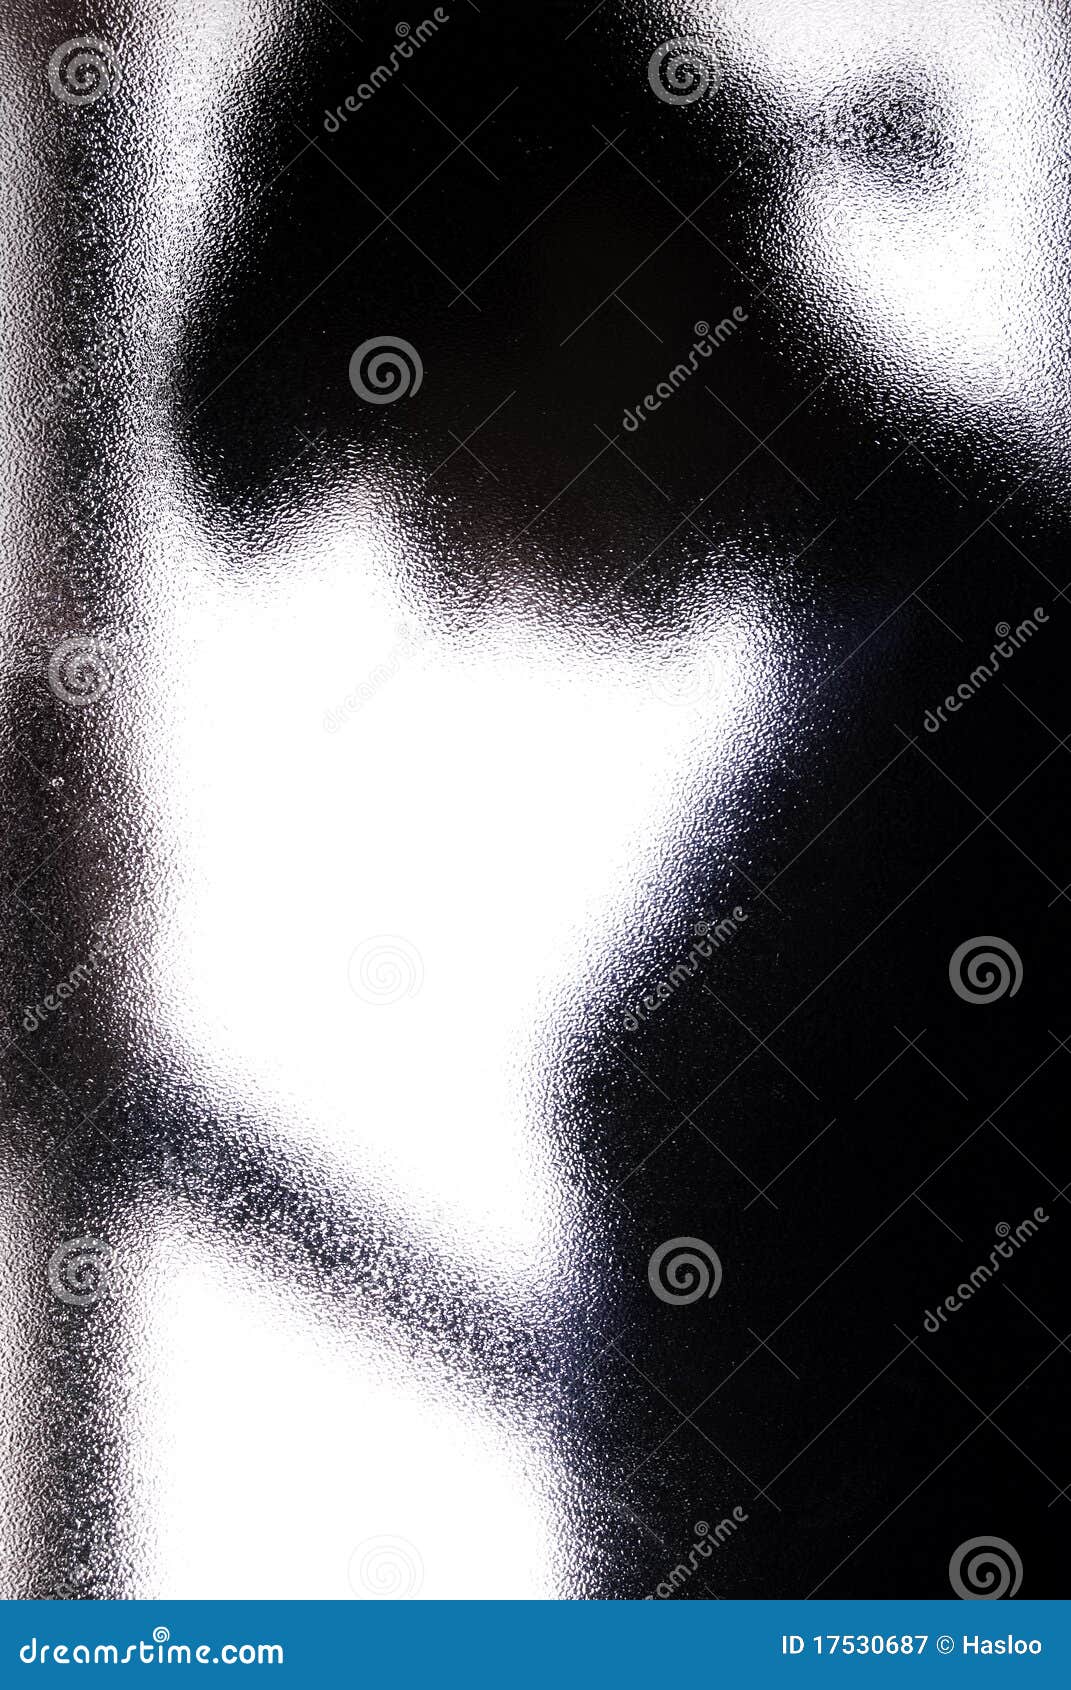 Woman behind the glass stock image. Image of lonely, touch - 17530687